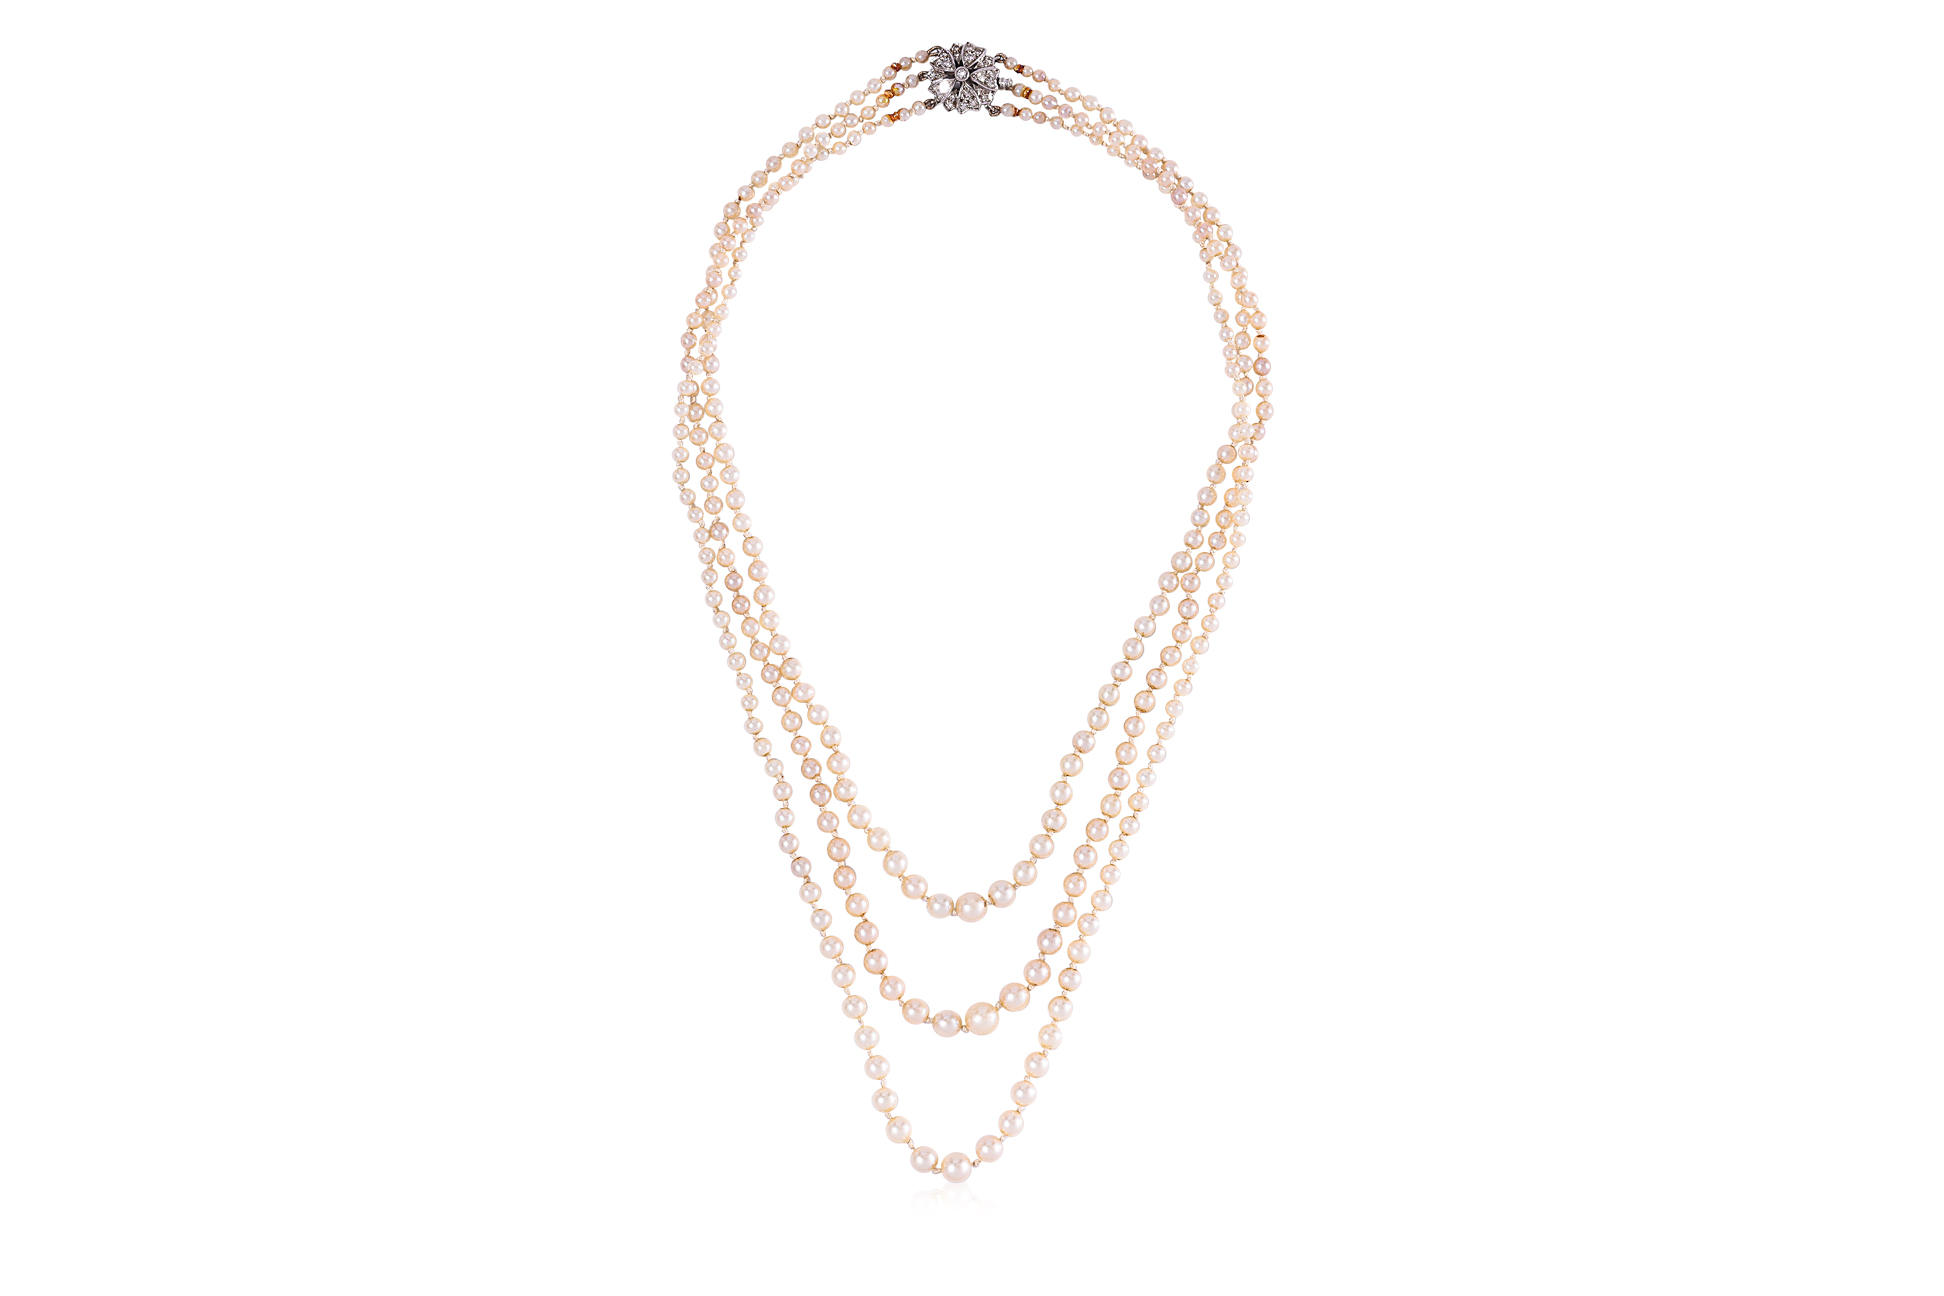 A THREE STRAND AKOYA CULTURED PEARL NECKLACE - Image 2 of 5